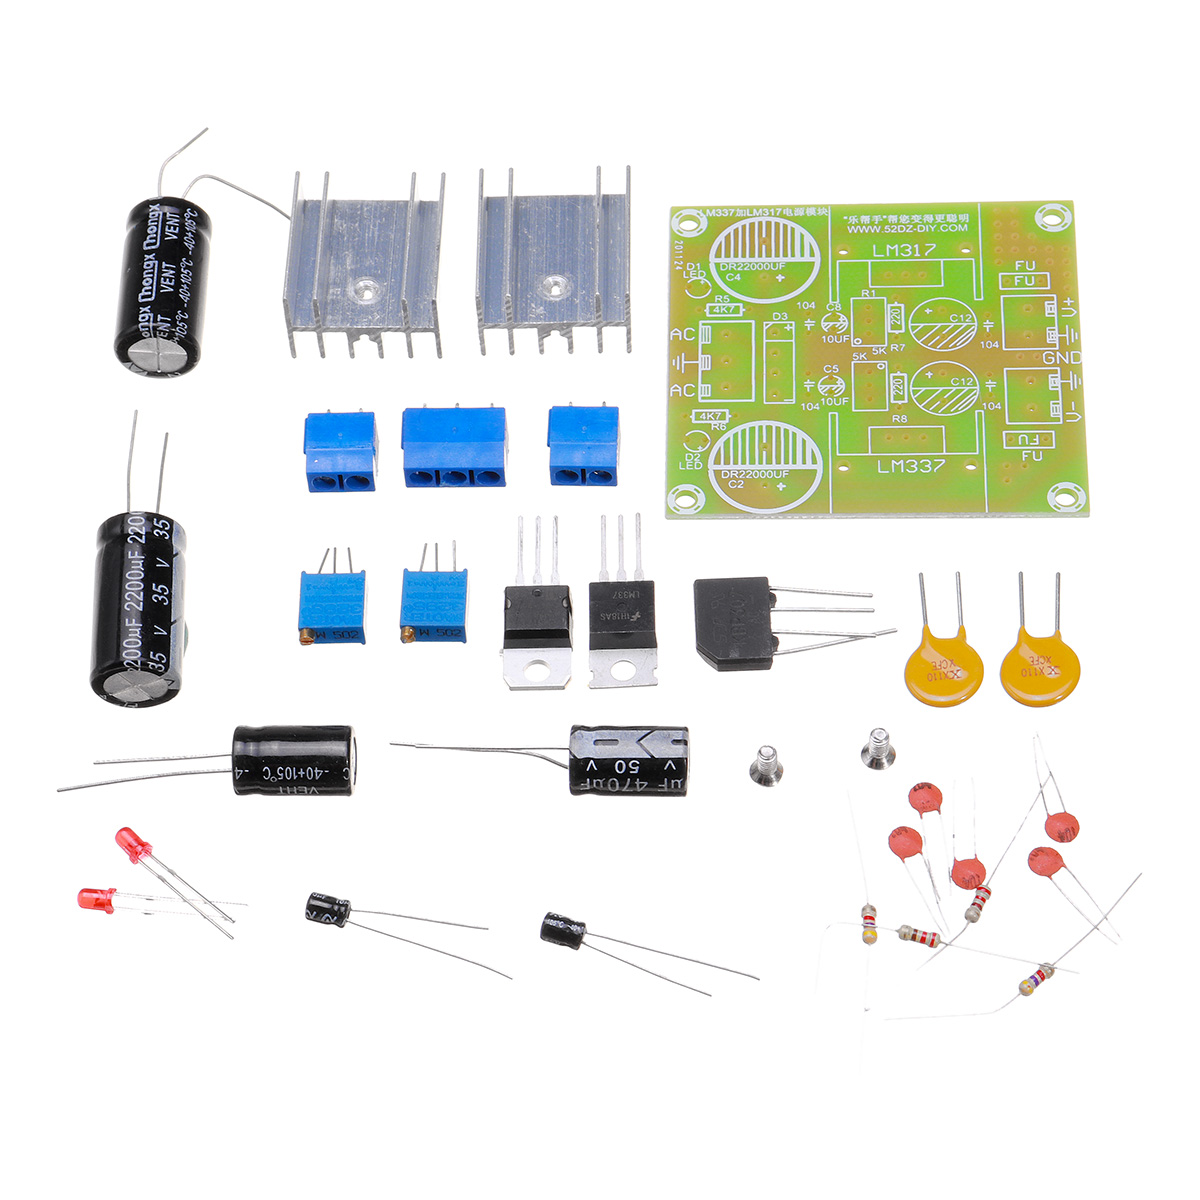 LM317 LM377 DIY Positive and Negative Dual Power Supply Adjustable Regulated Power Supply Kit Learning Project Electronic Kit